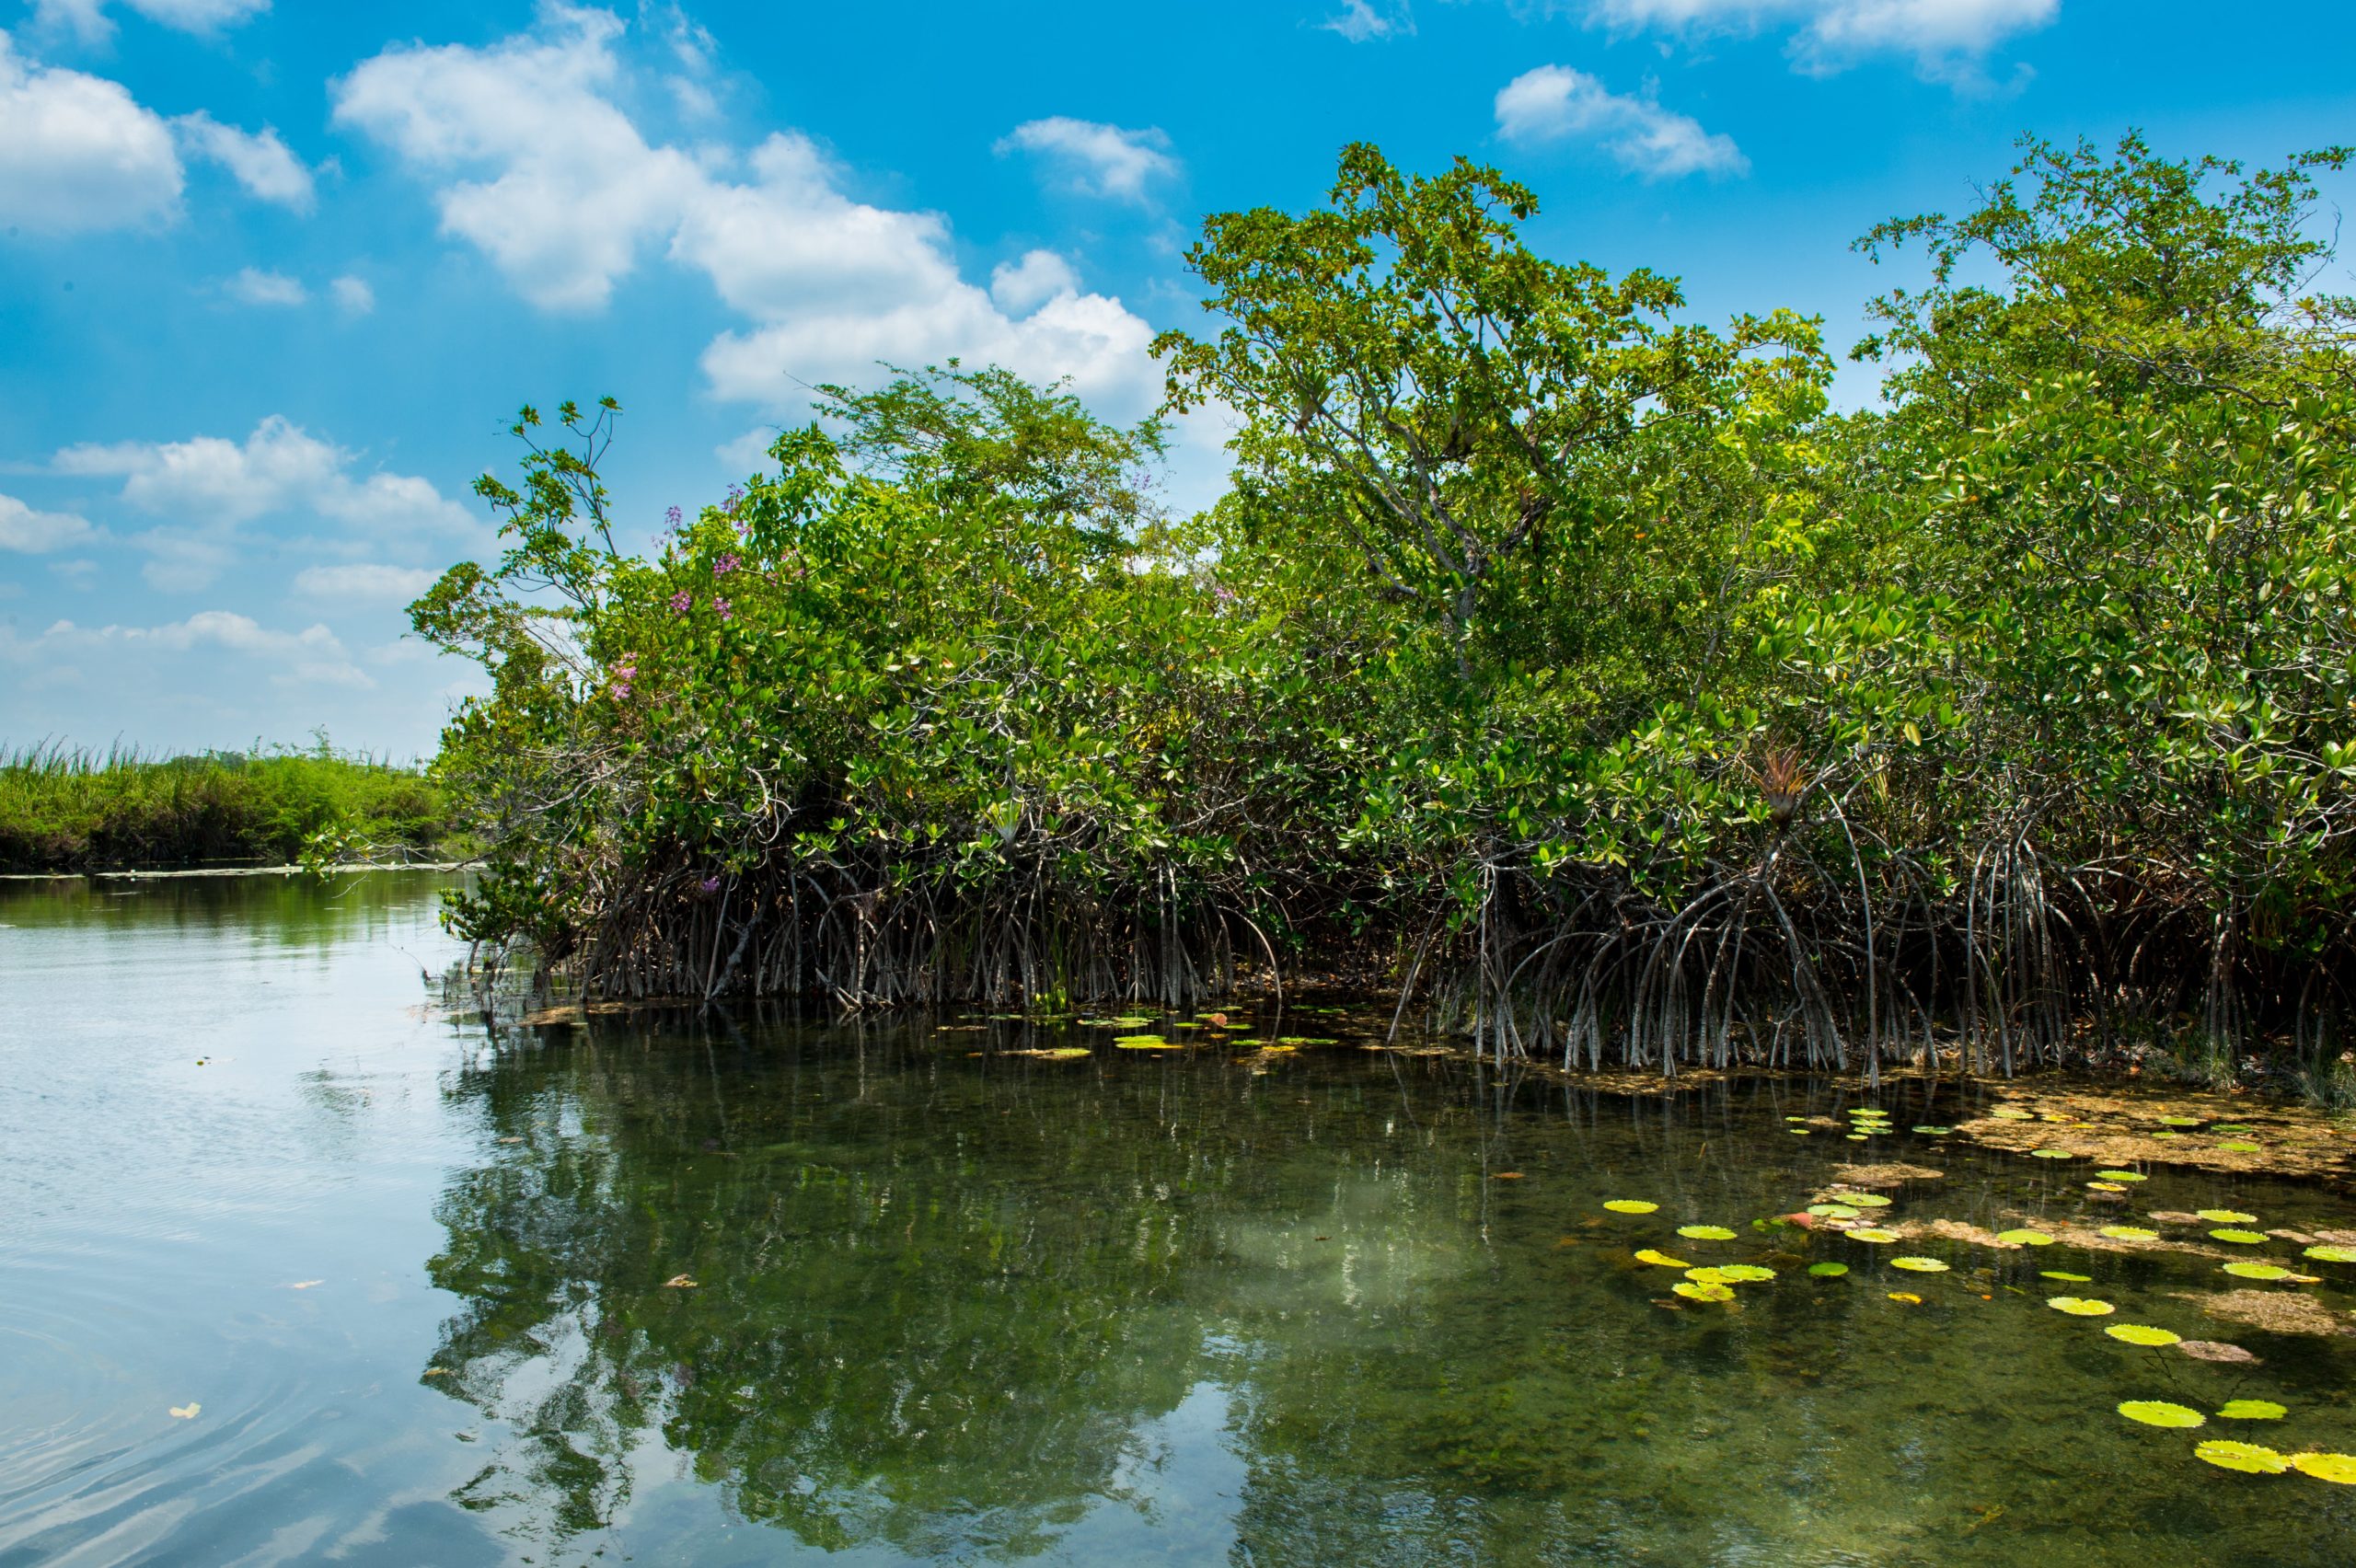 A stand of red mangroves sits in the calm, calcium-rich, fresh waters of the San Pedro Mártir River, Tabasco, Mexico. (Photo: Ben Meissner)